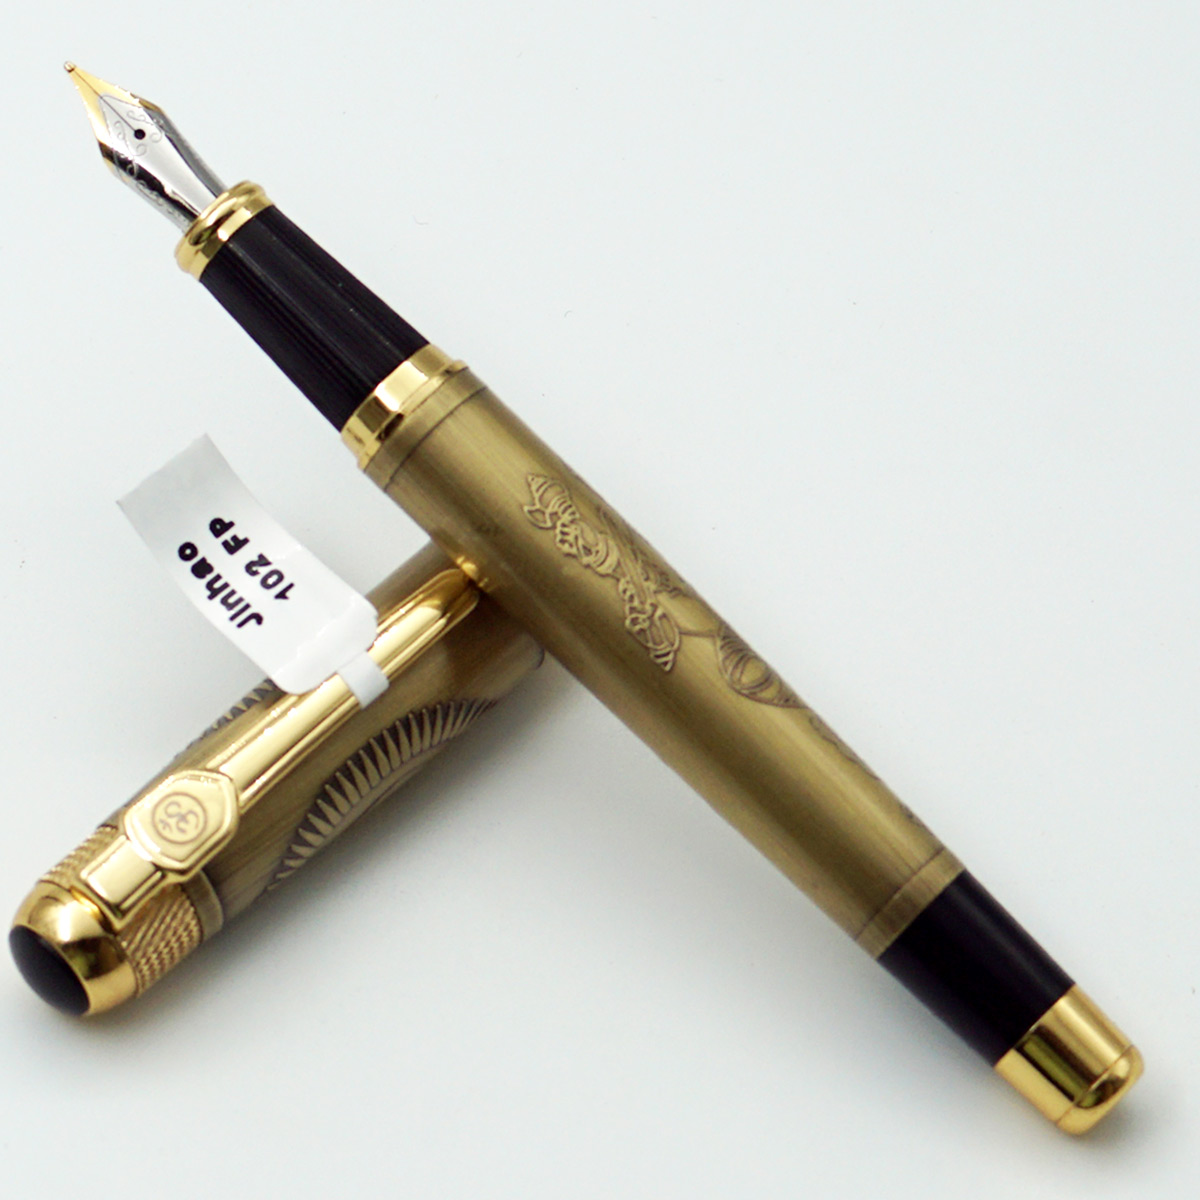 Levin 102 Full Golden Color Body With Ganesh Art Work On Body And Om Symbol On Cap With 5.5 Fine Nib Converter Type Fountain pen SKU 24535